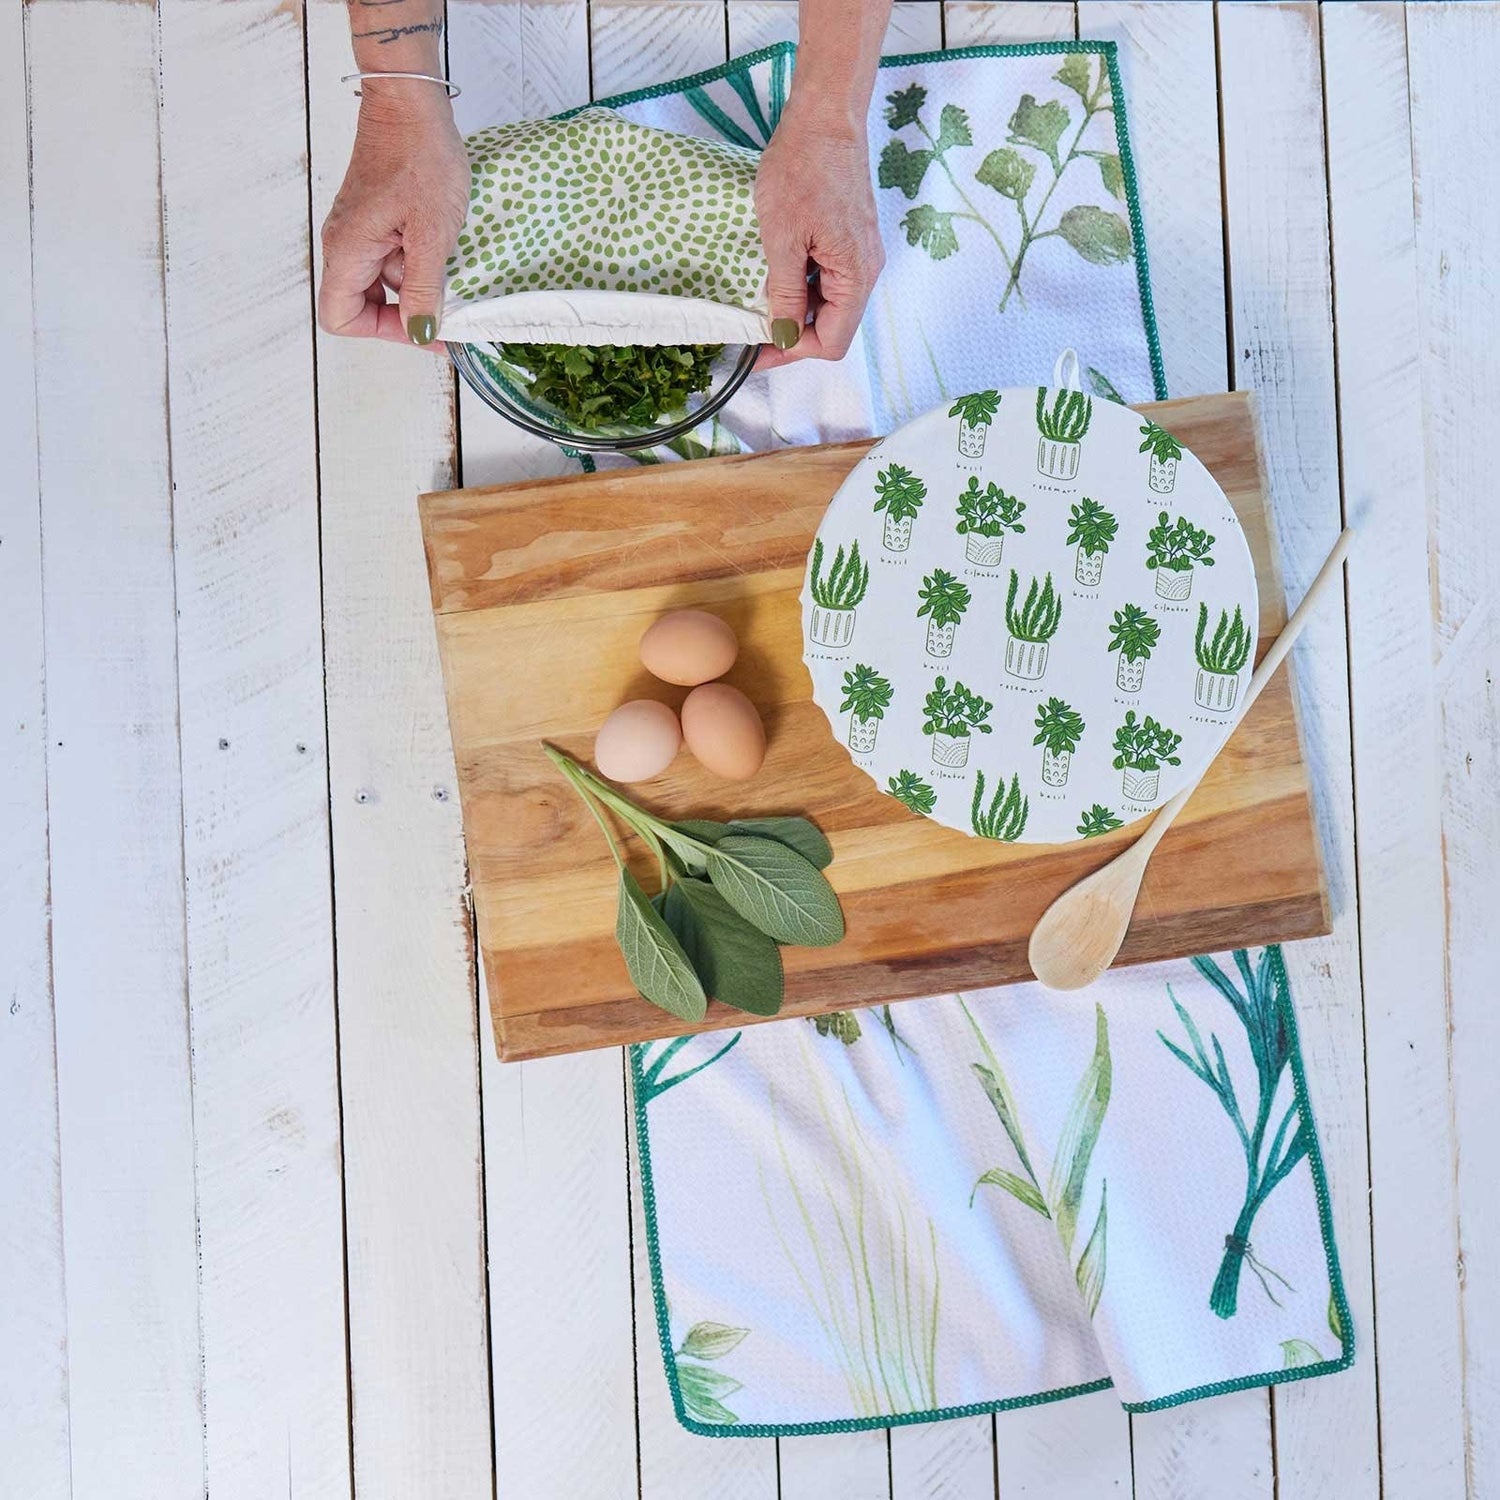 Herbs Green blu Kitchen Food Storage Covers (Set of 3 ) Eco Dish Cover - rockflowerpaper